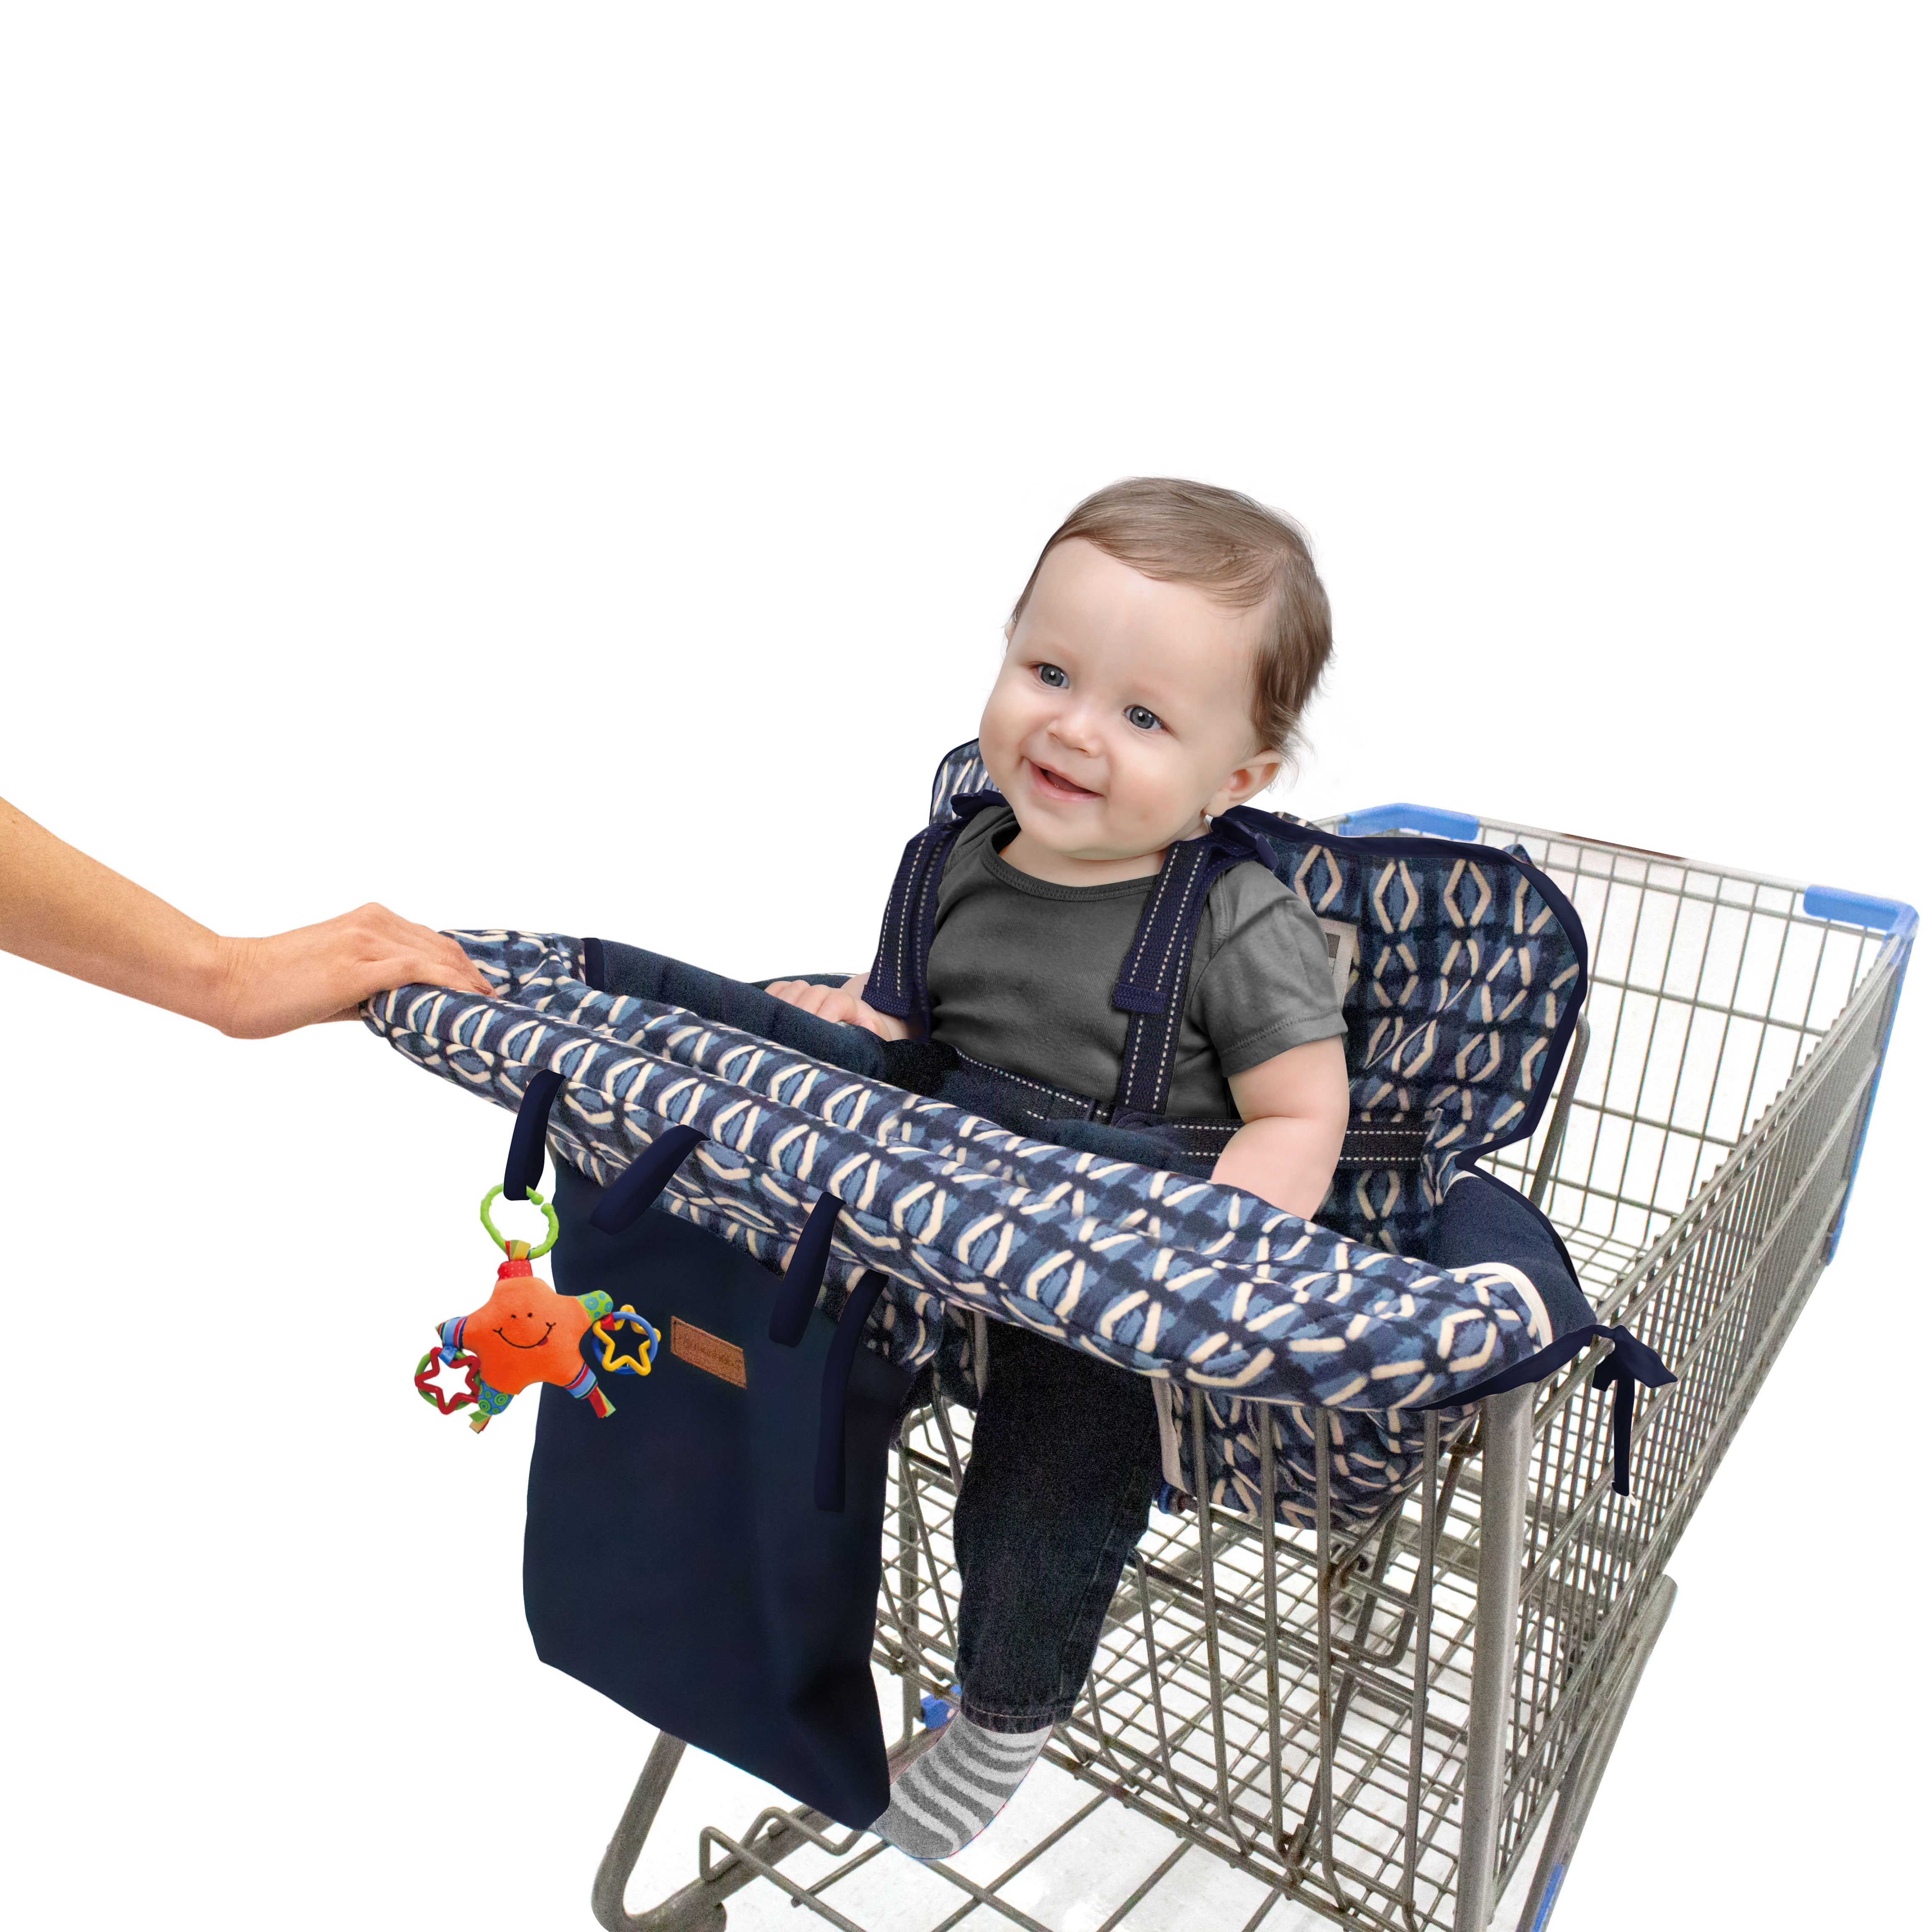 Portable Shopping Cart Seat Cover Infants & Toddlers ✮ 2-in-1 Design ✮ Includes Free Carry Bag ✮ Kids Simple Gray Chevron High Chair and Grocery Cart Covers for Babies 